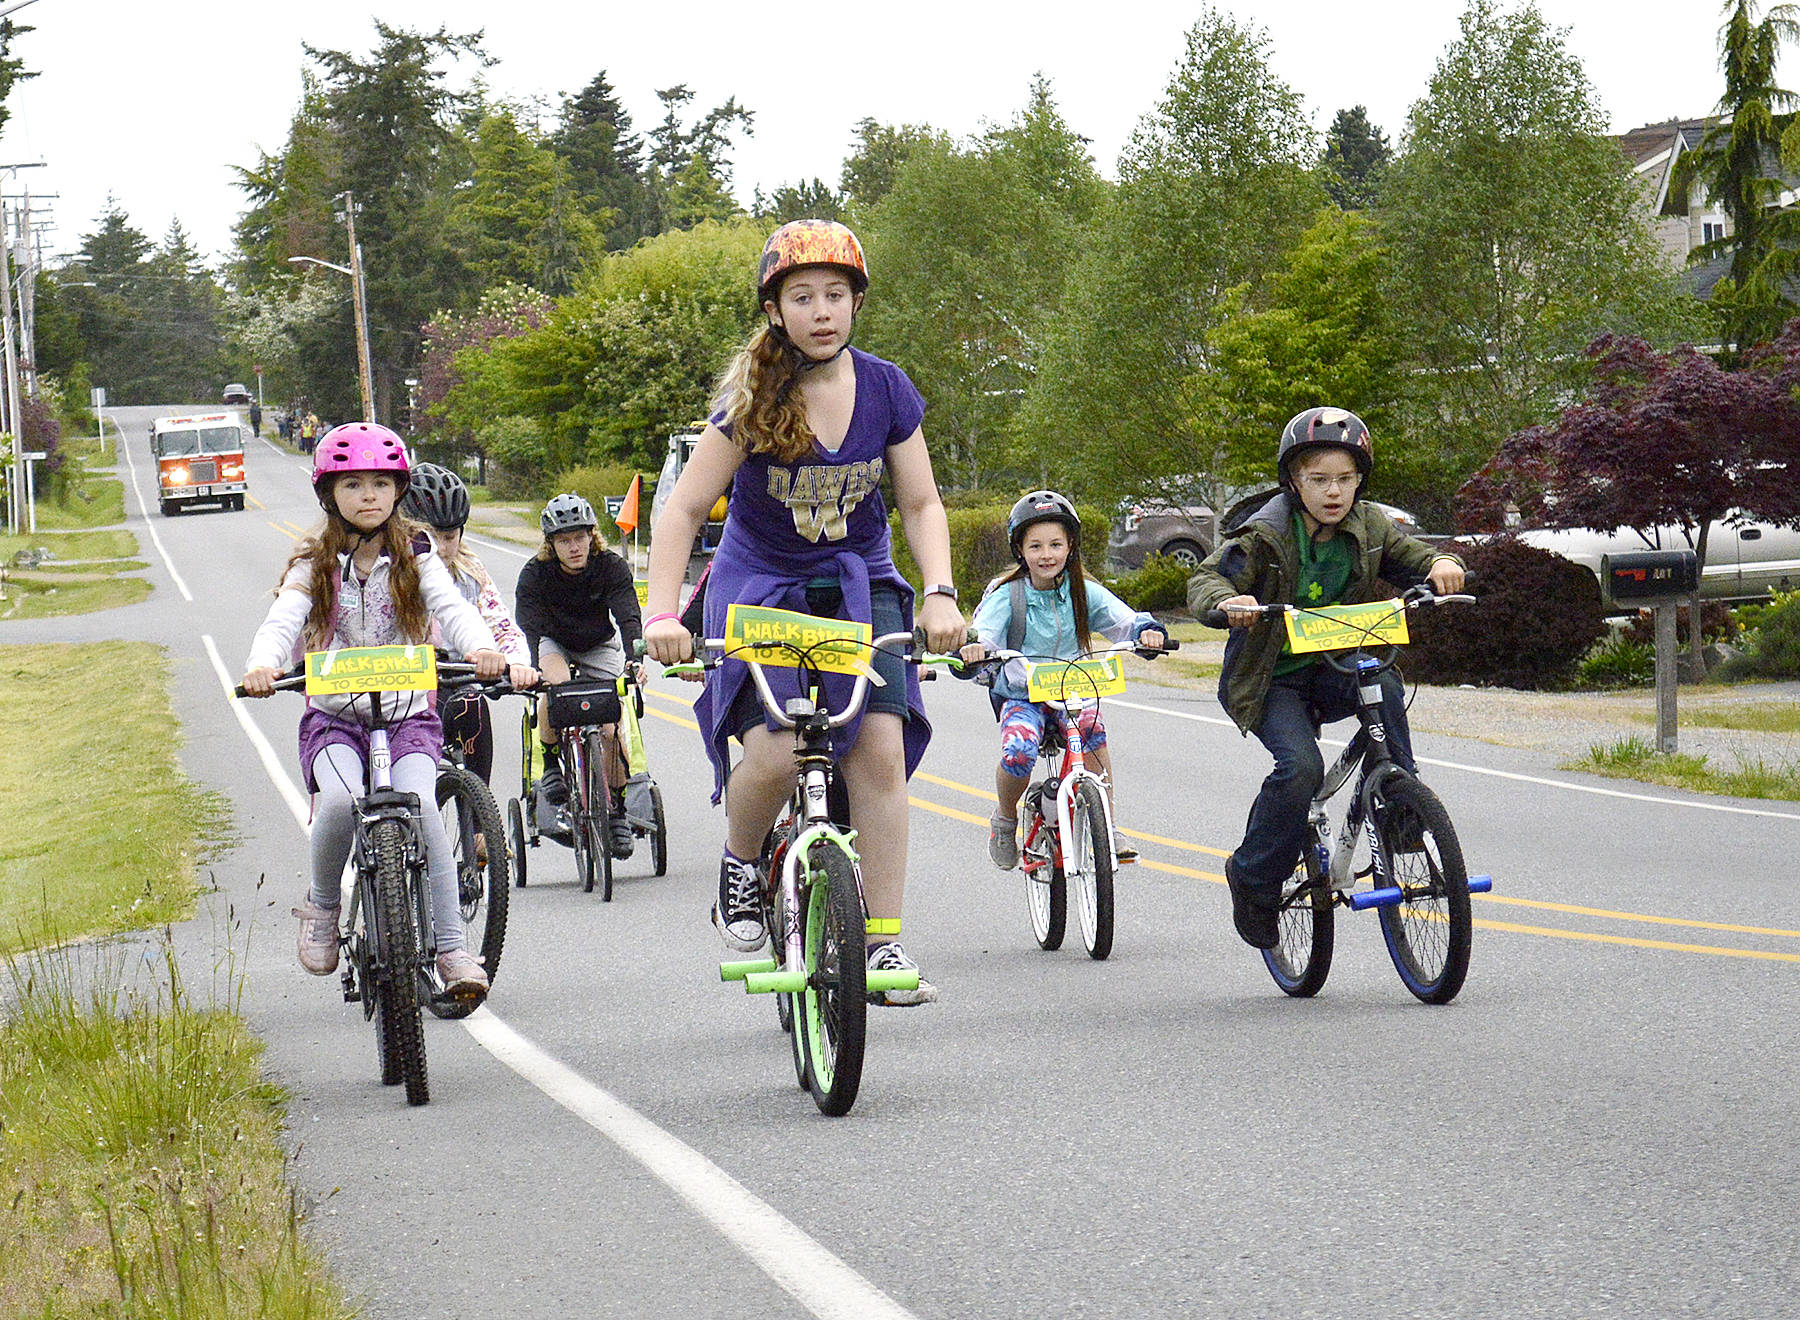 Approximately 55 Coupeville Elementary School fourth and fifth graders took to the streets, safely of course, Wednesday morning for the second annual Bike to School Day. Law enforcement and Central Whidbey Island Fire and Rescue escorted the bikers, and walkers, as part of the national initiative by the National Center for Safe Routes to School. (Photo by Laura Guido/Whidbey News-Times)